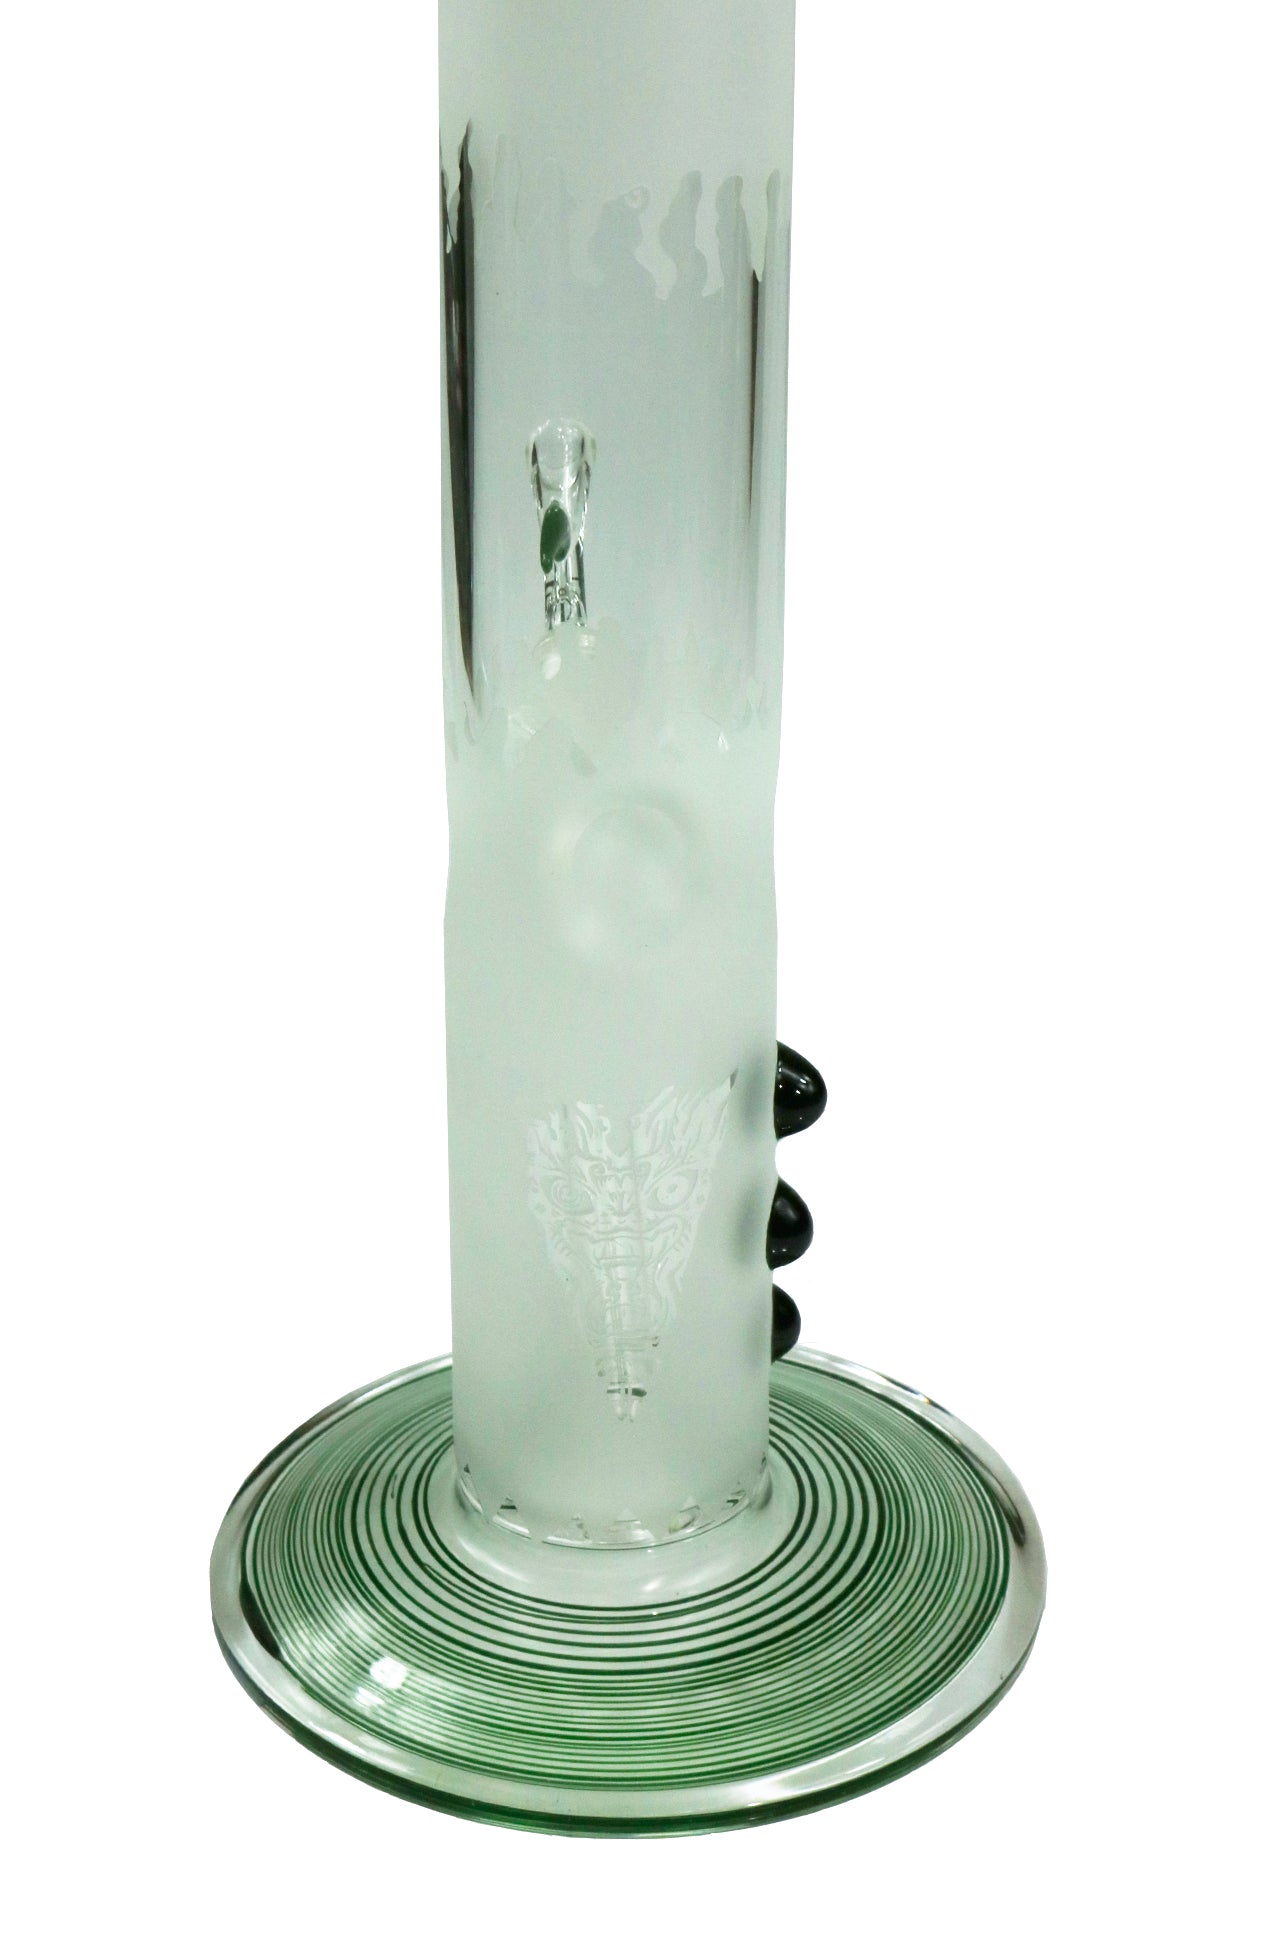 12'' Section Sandblasted Jolly Roger Water Bong with Green & Blue details by Phil Sundling